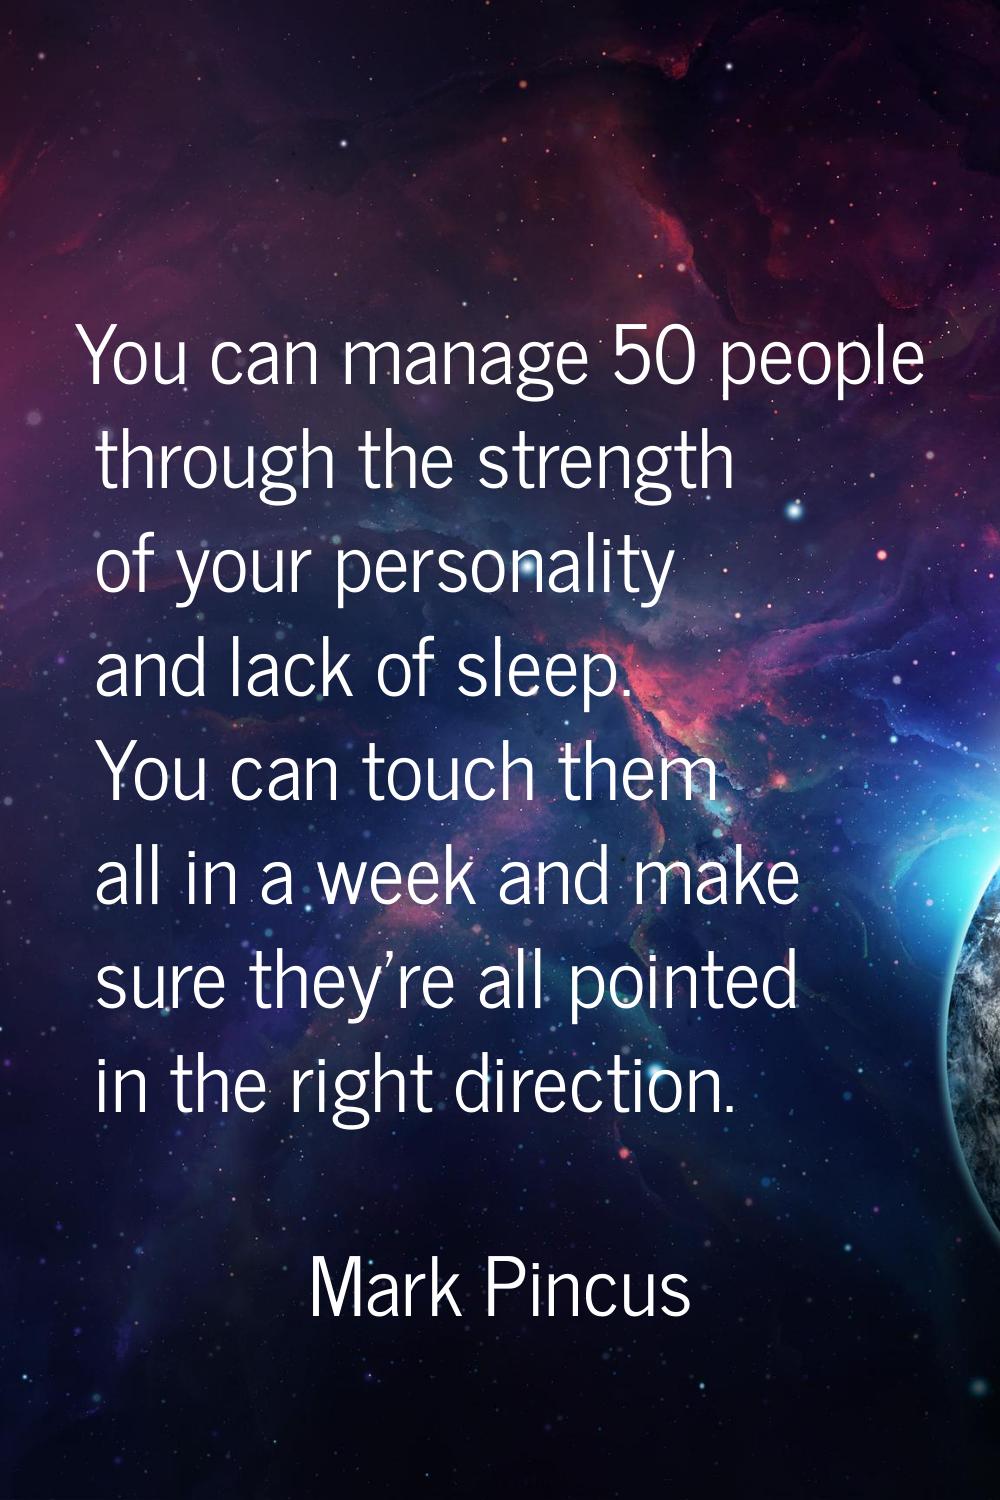 You can manage 50 people through the strength of your personality and lack of sleep. You can touch 